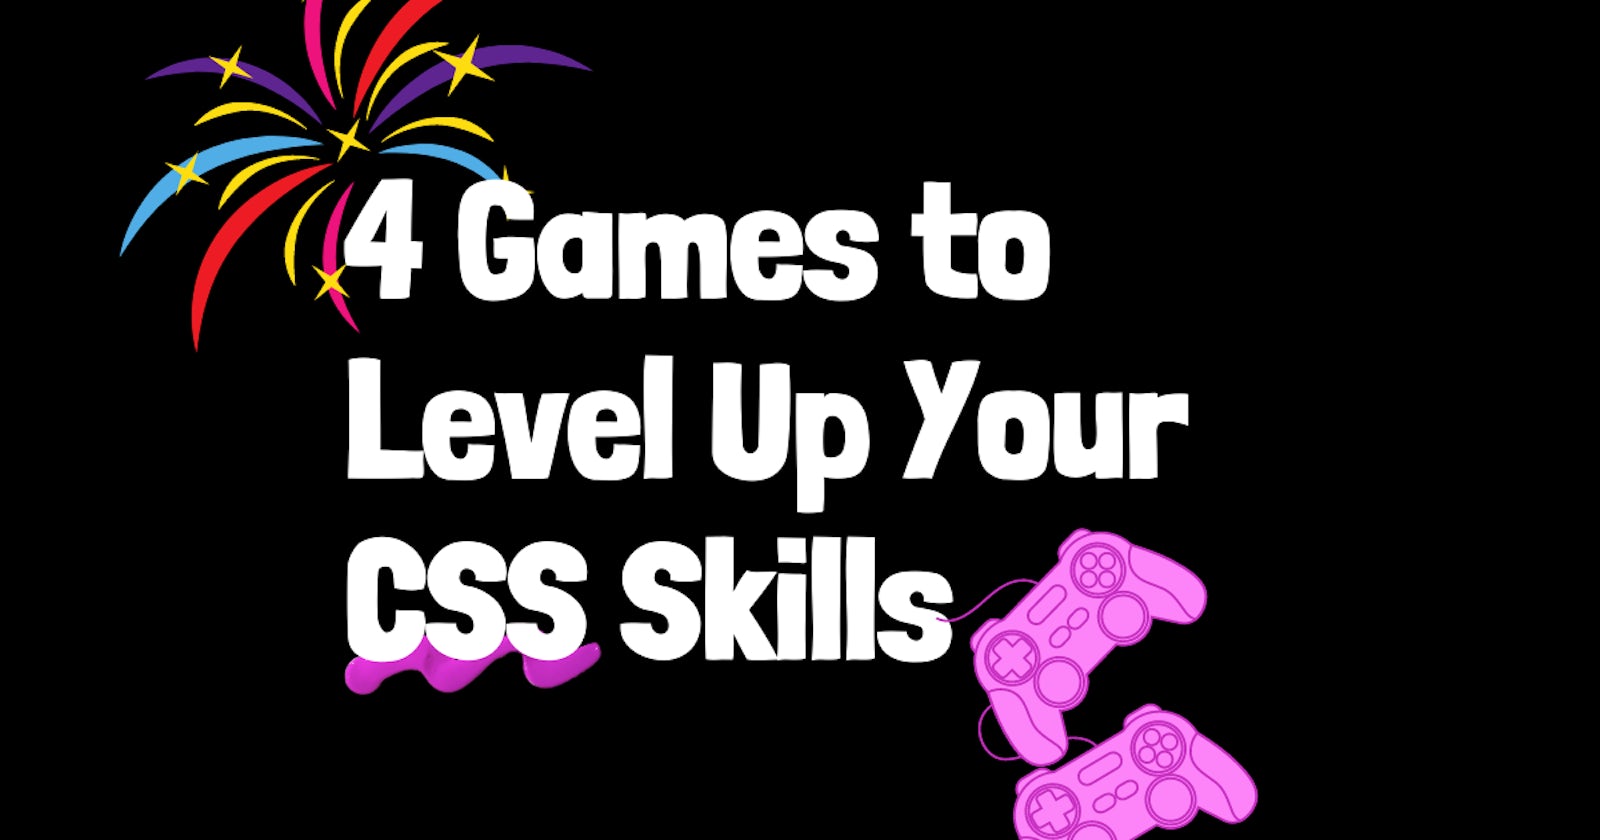 4 Games to Level Up Your CSS Skills